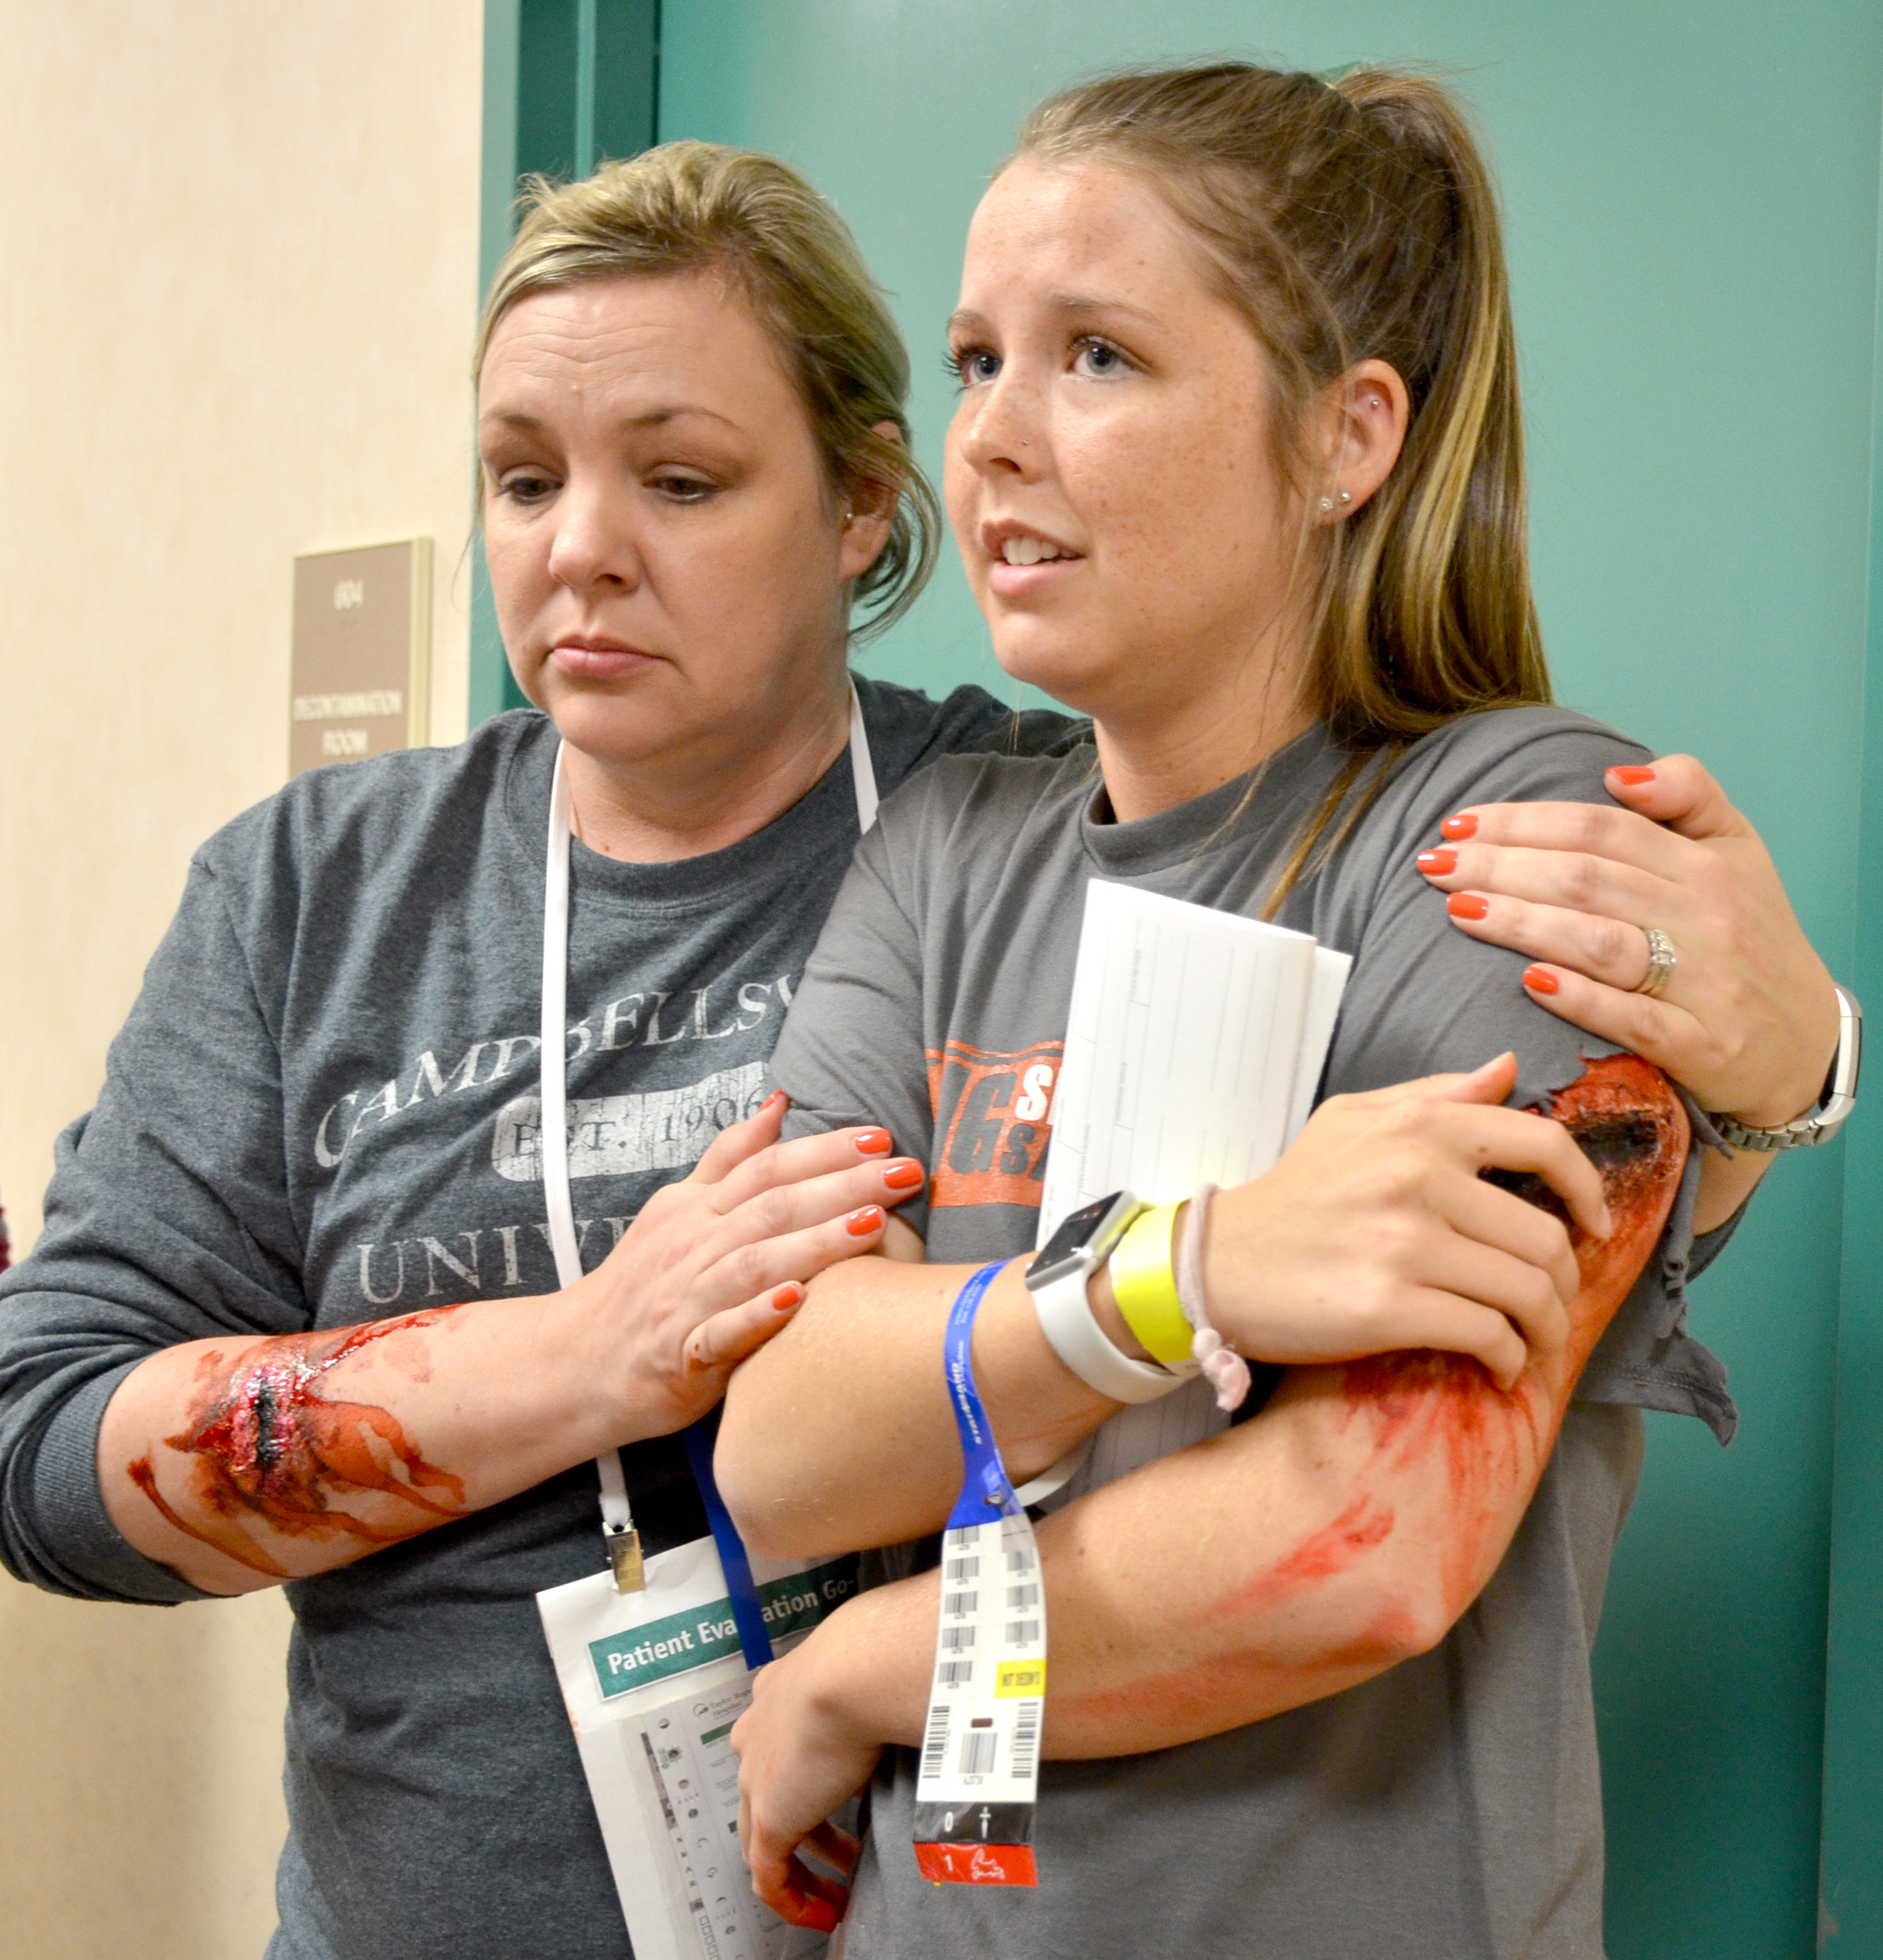 Jennifer Richerson, left, secretary for the School of Nursing, comforts Taylor Elardo, a CU nursing student, as they play shot victims during the active shooter mock scenario held on Campbellsville University’s campus on April 27. (CU Photo by Andrea Burnside)